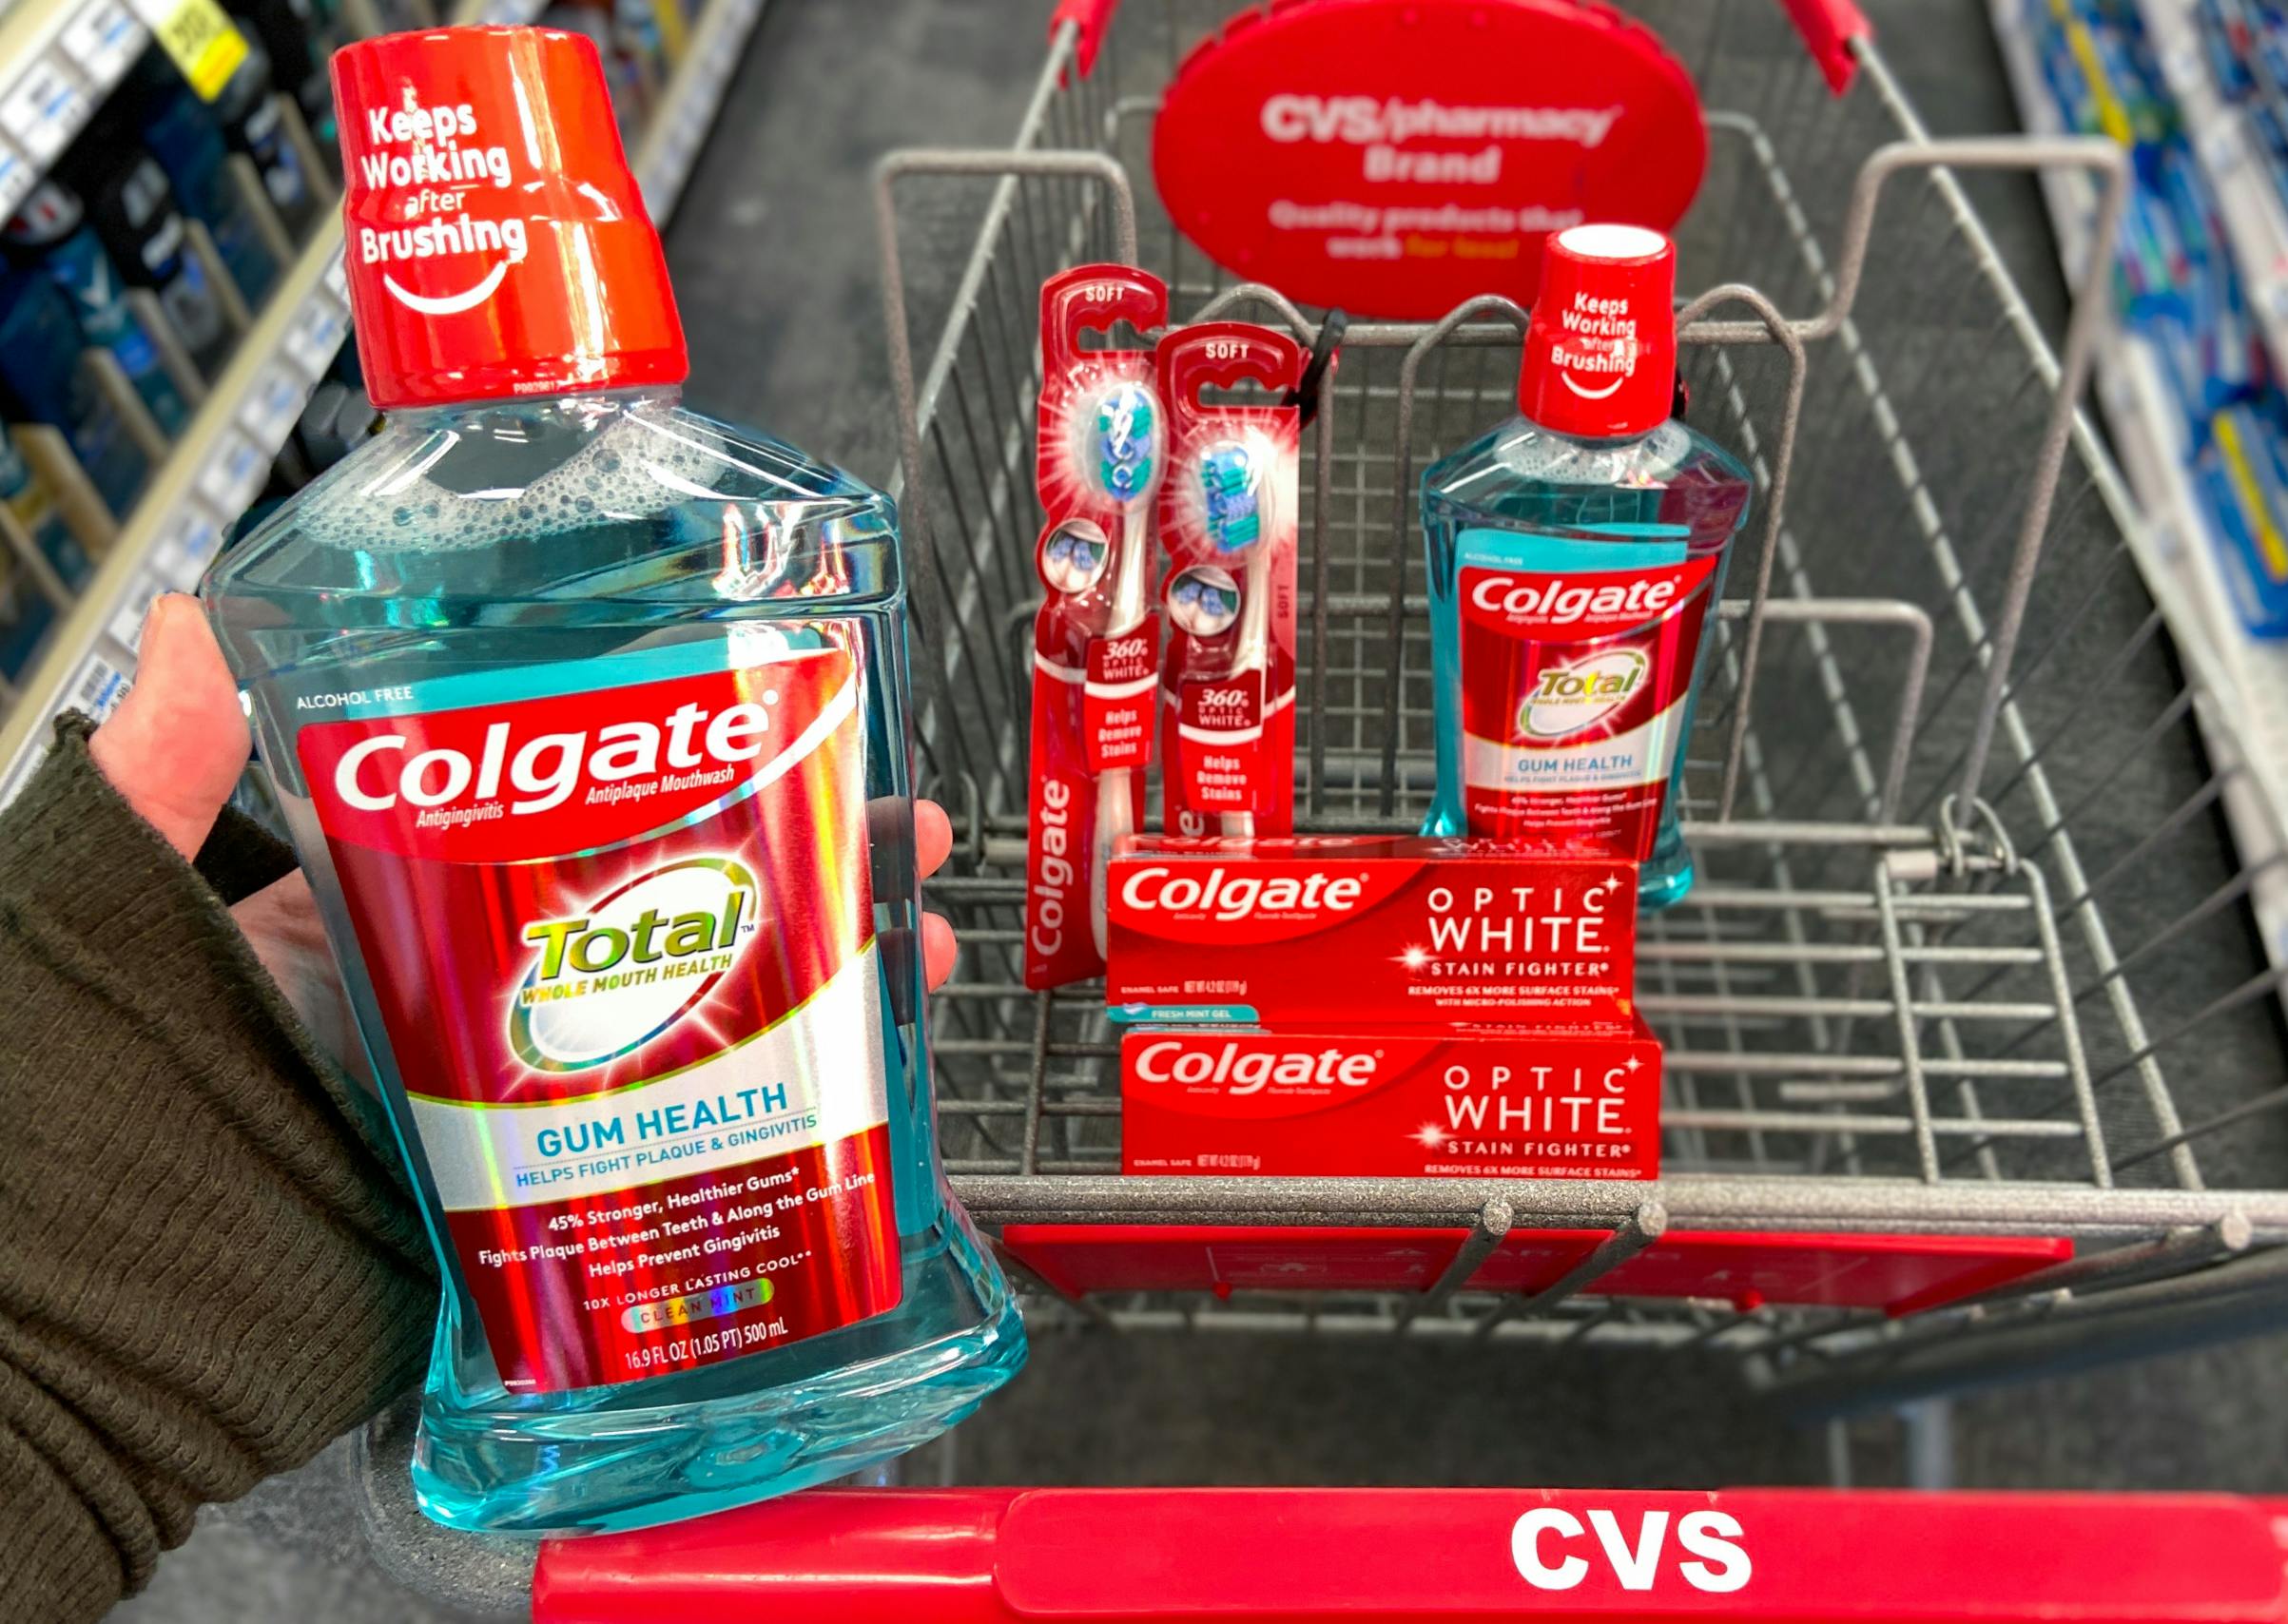 A person's hand holding a bottle of Colgate Total mouthwash above a CVS shopping cart with more Colgate mouthwash, Colgate Optic White toothpaste, and Colgate toothbrushes in the basket.